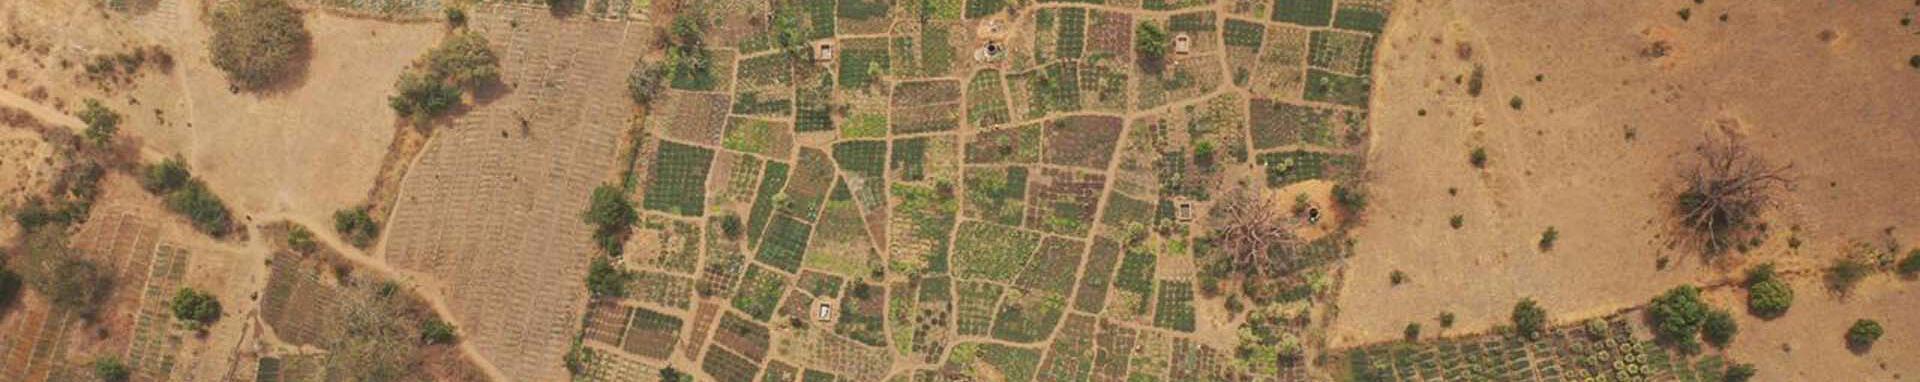 CIF Action Jardin Maraicher Decentralized forest and woodland management project, Burkina Faso 2020